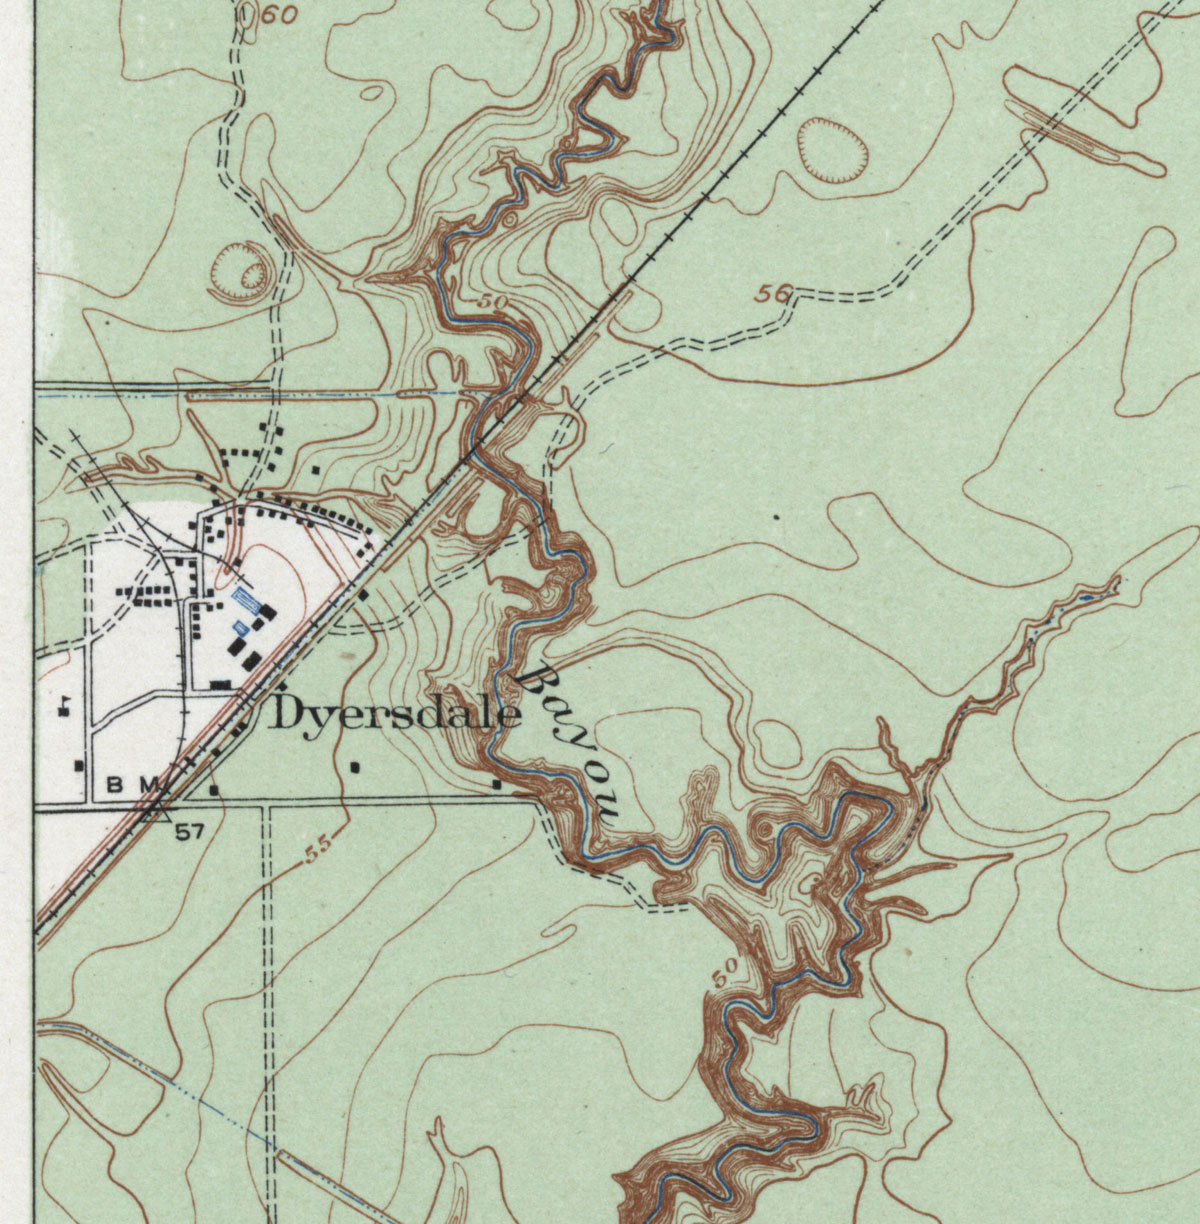 Bradford-Hicks Lumber Company (Tex.), Map Showing Dyersdale, Texas in 1916.